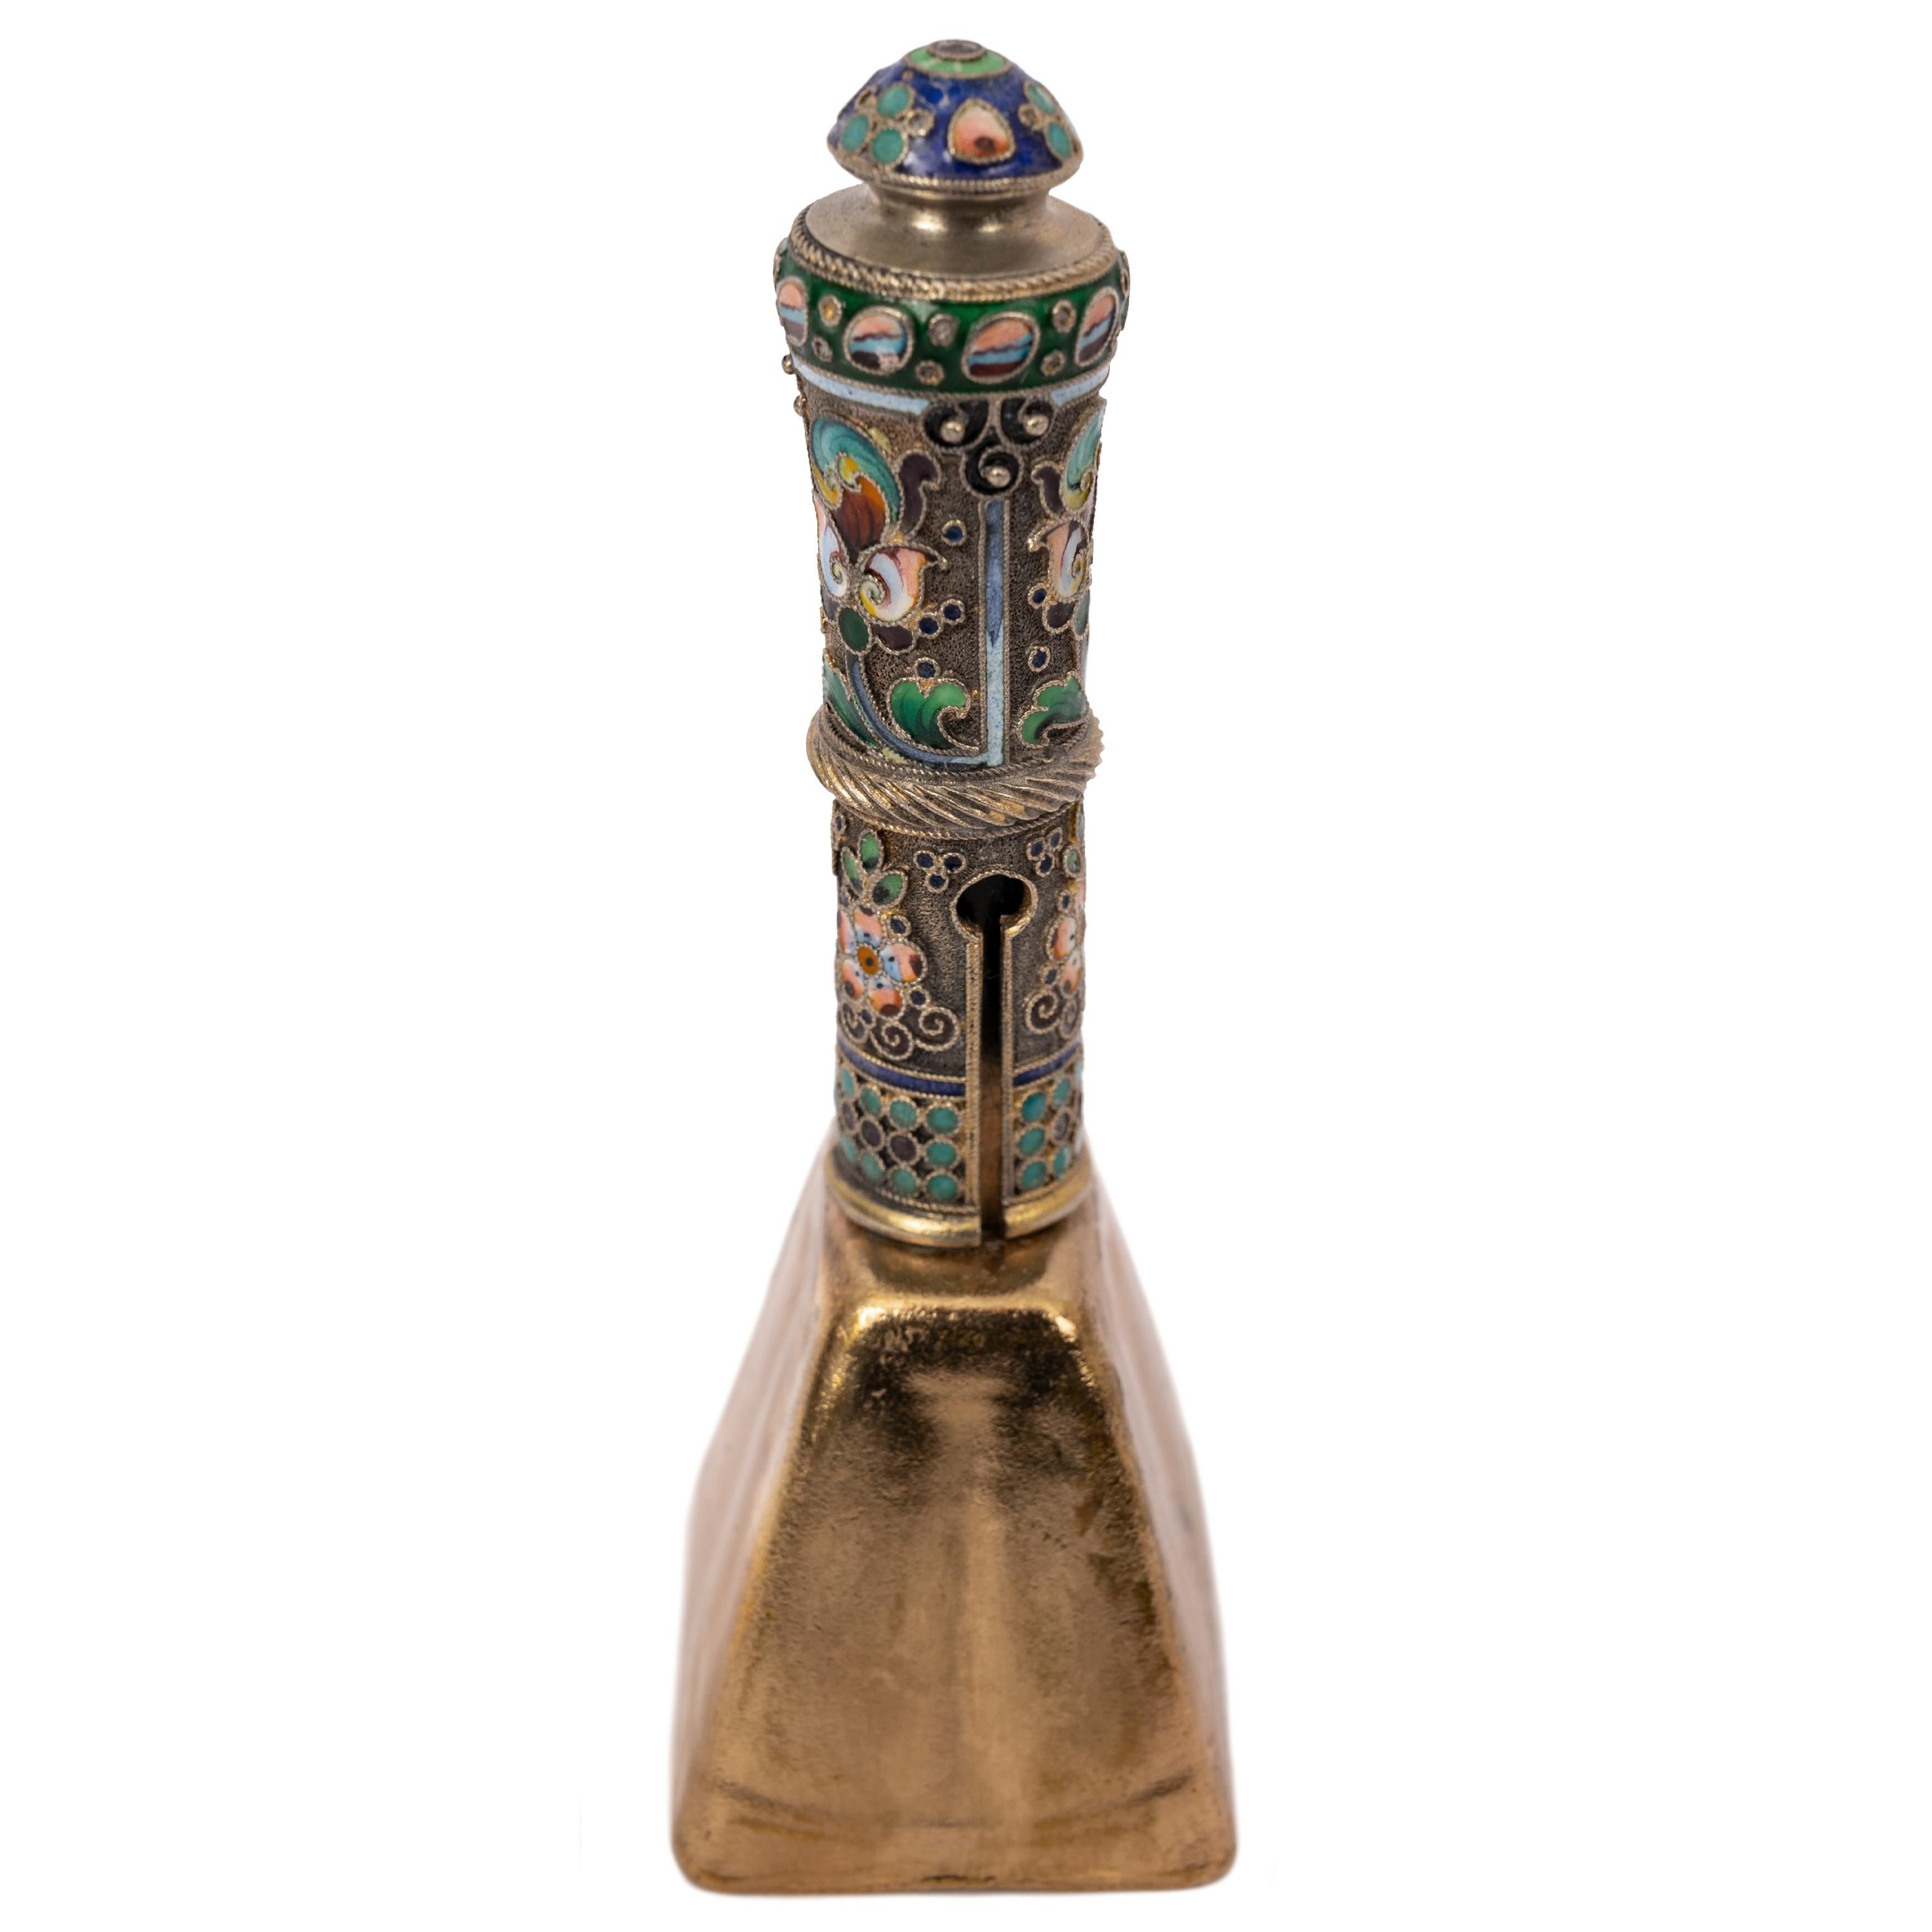 Baltic Antique Russian Imperial Silver Gilt Cloisonné Table Dinner Bell, Moscow, 1908